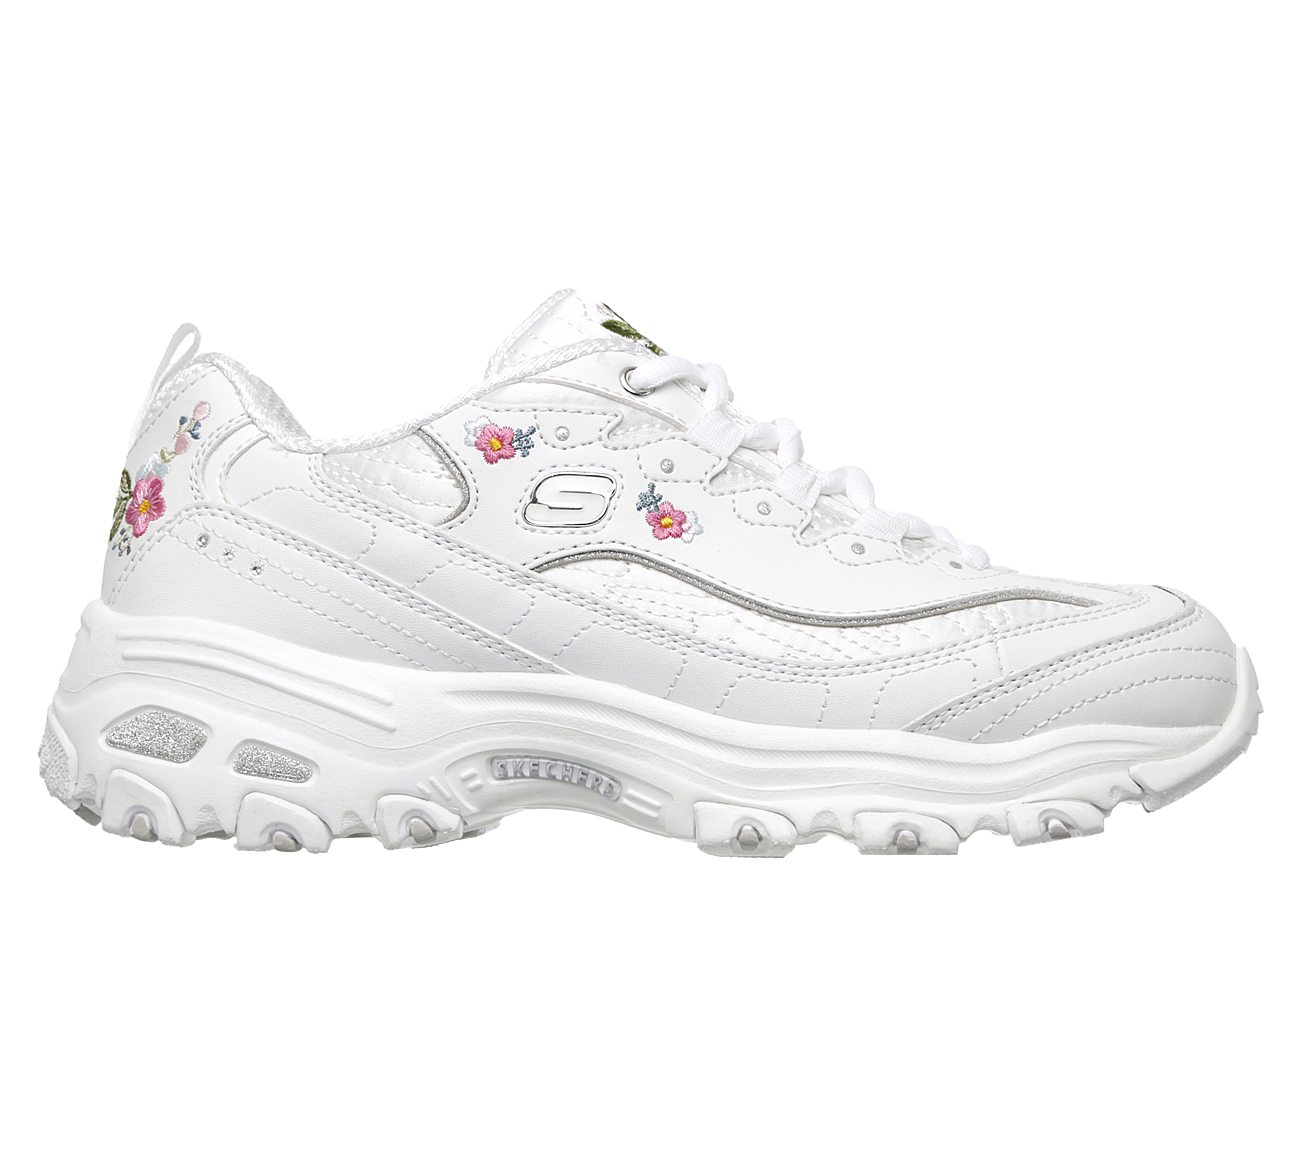 skechers all white leather shoes